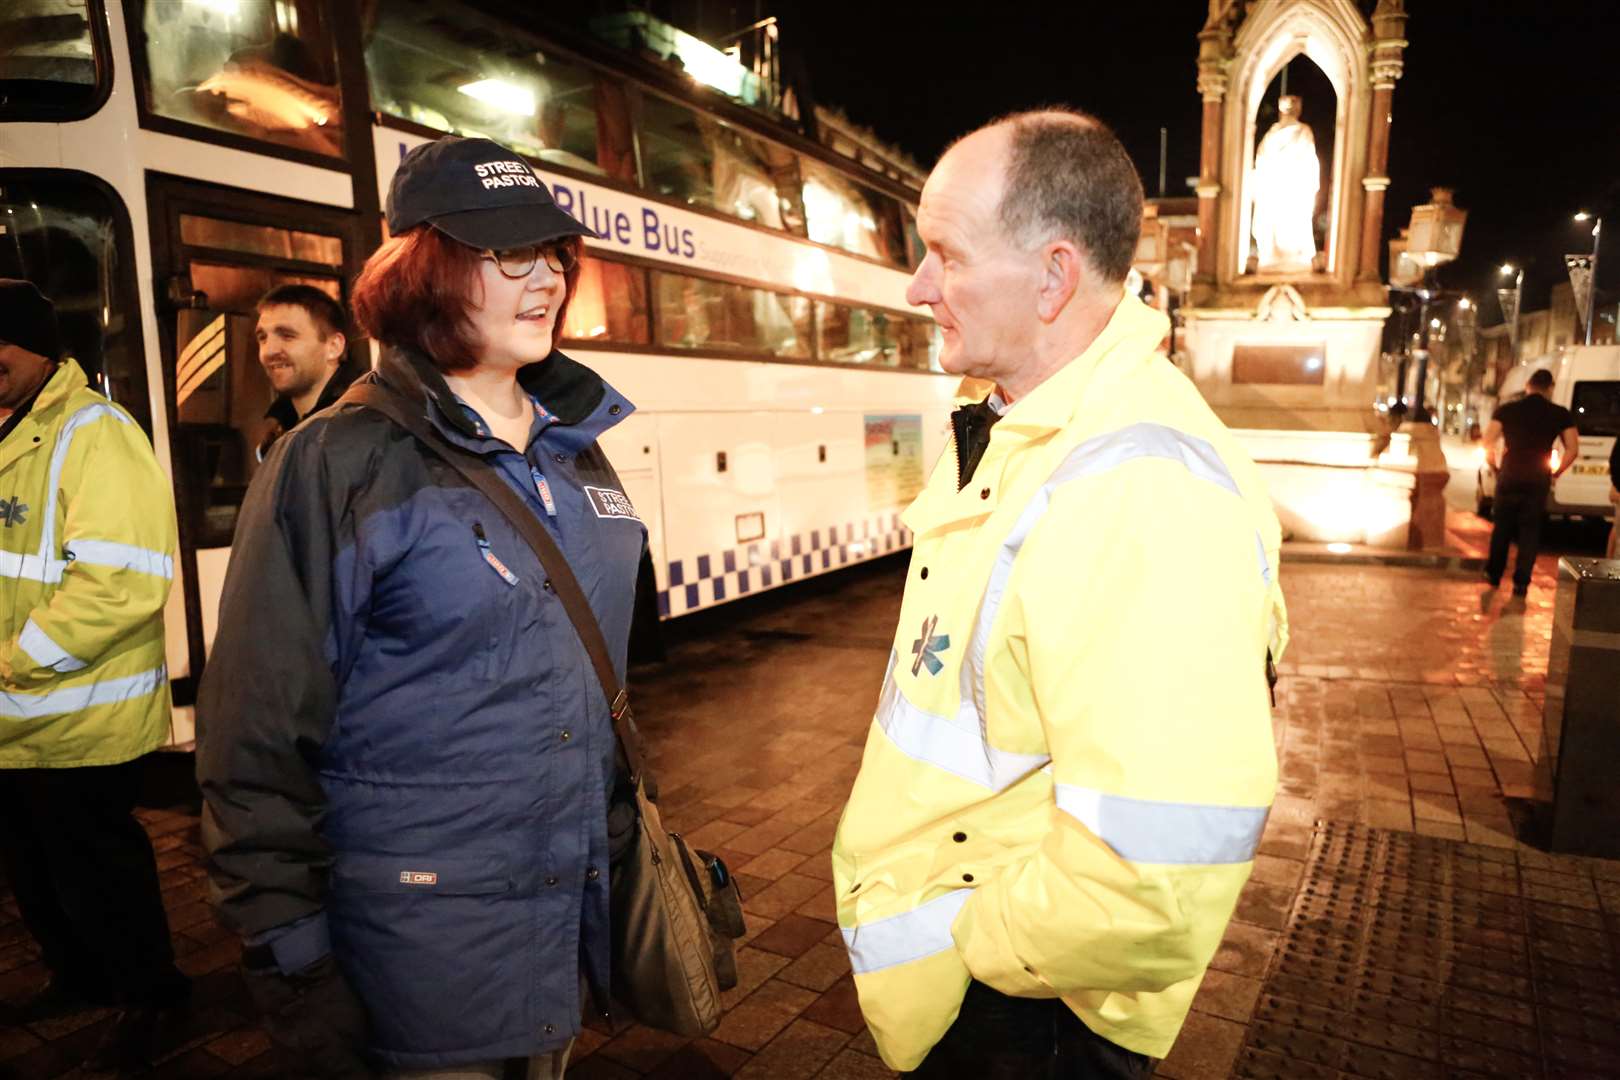 Street pastor Michelle Sheehan speaks to Paul Alcock of the Urban Blue Bus